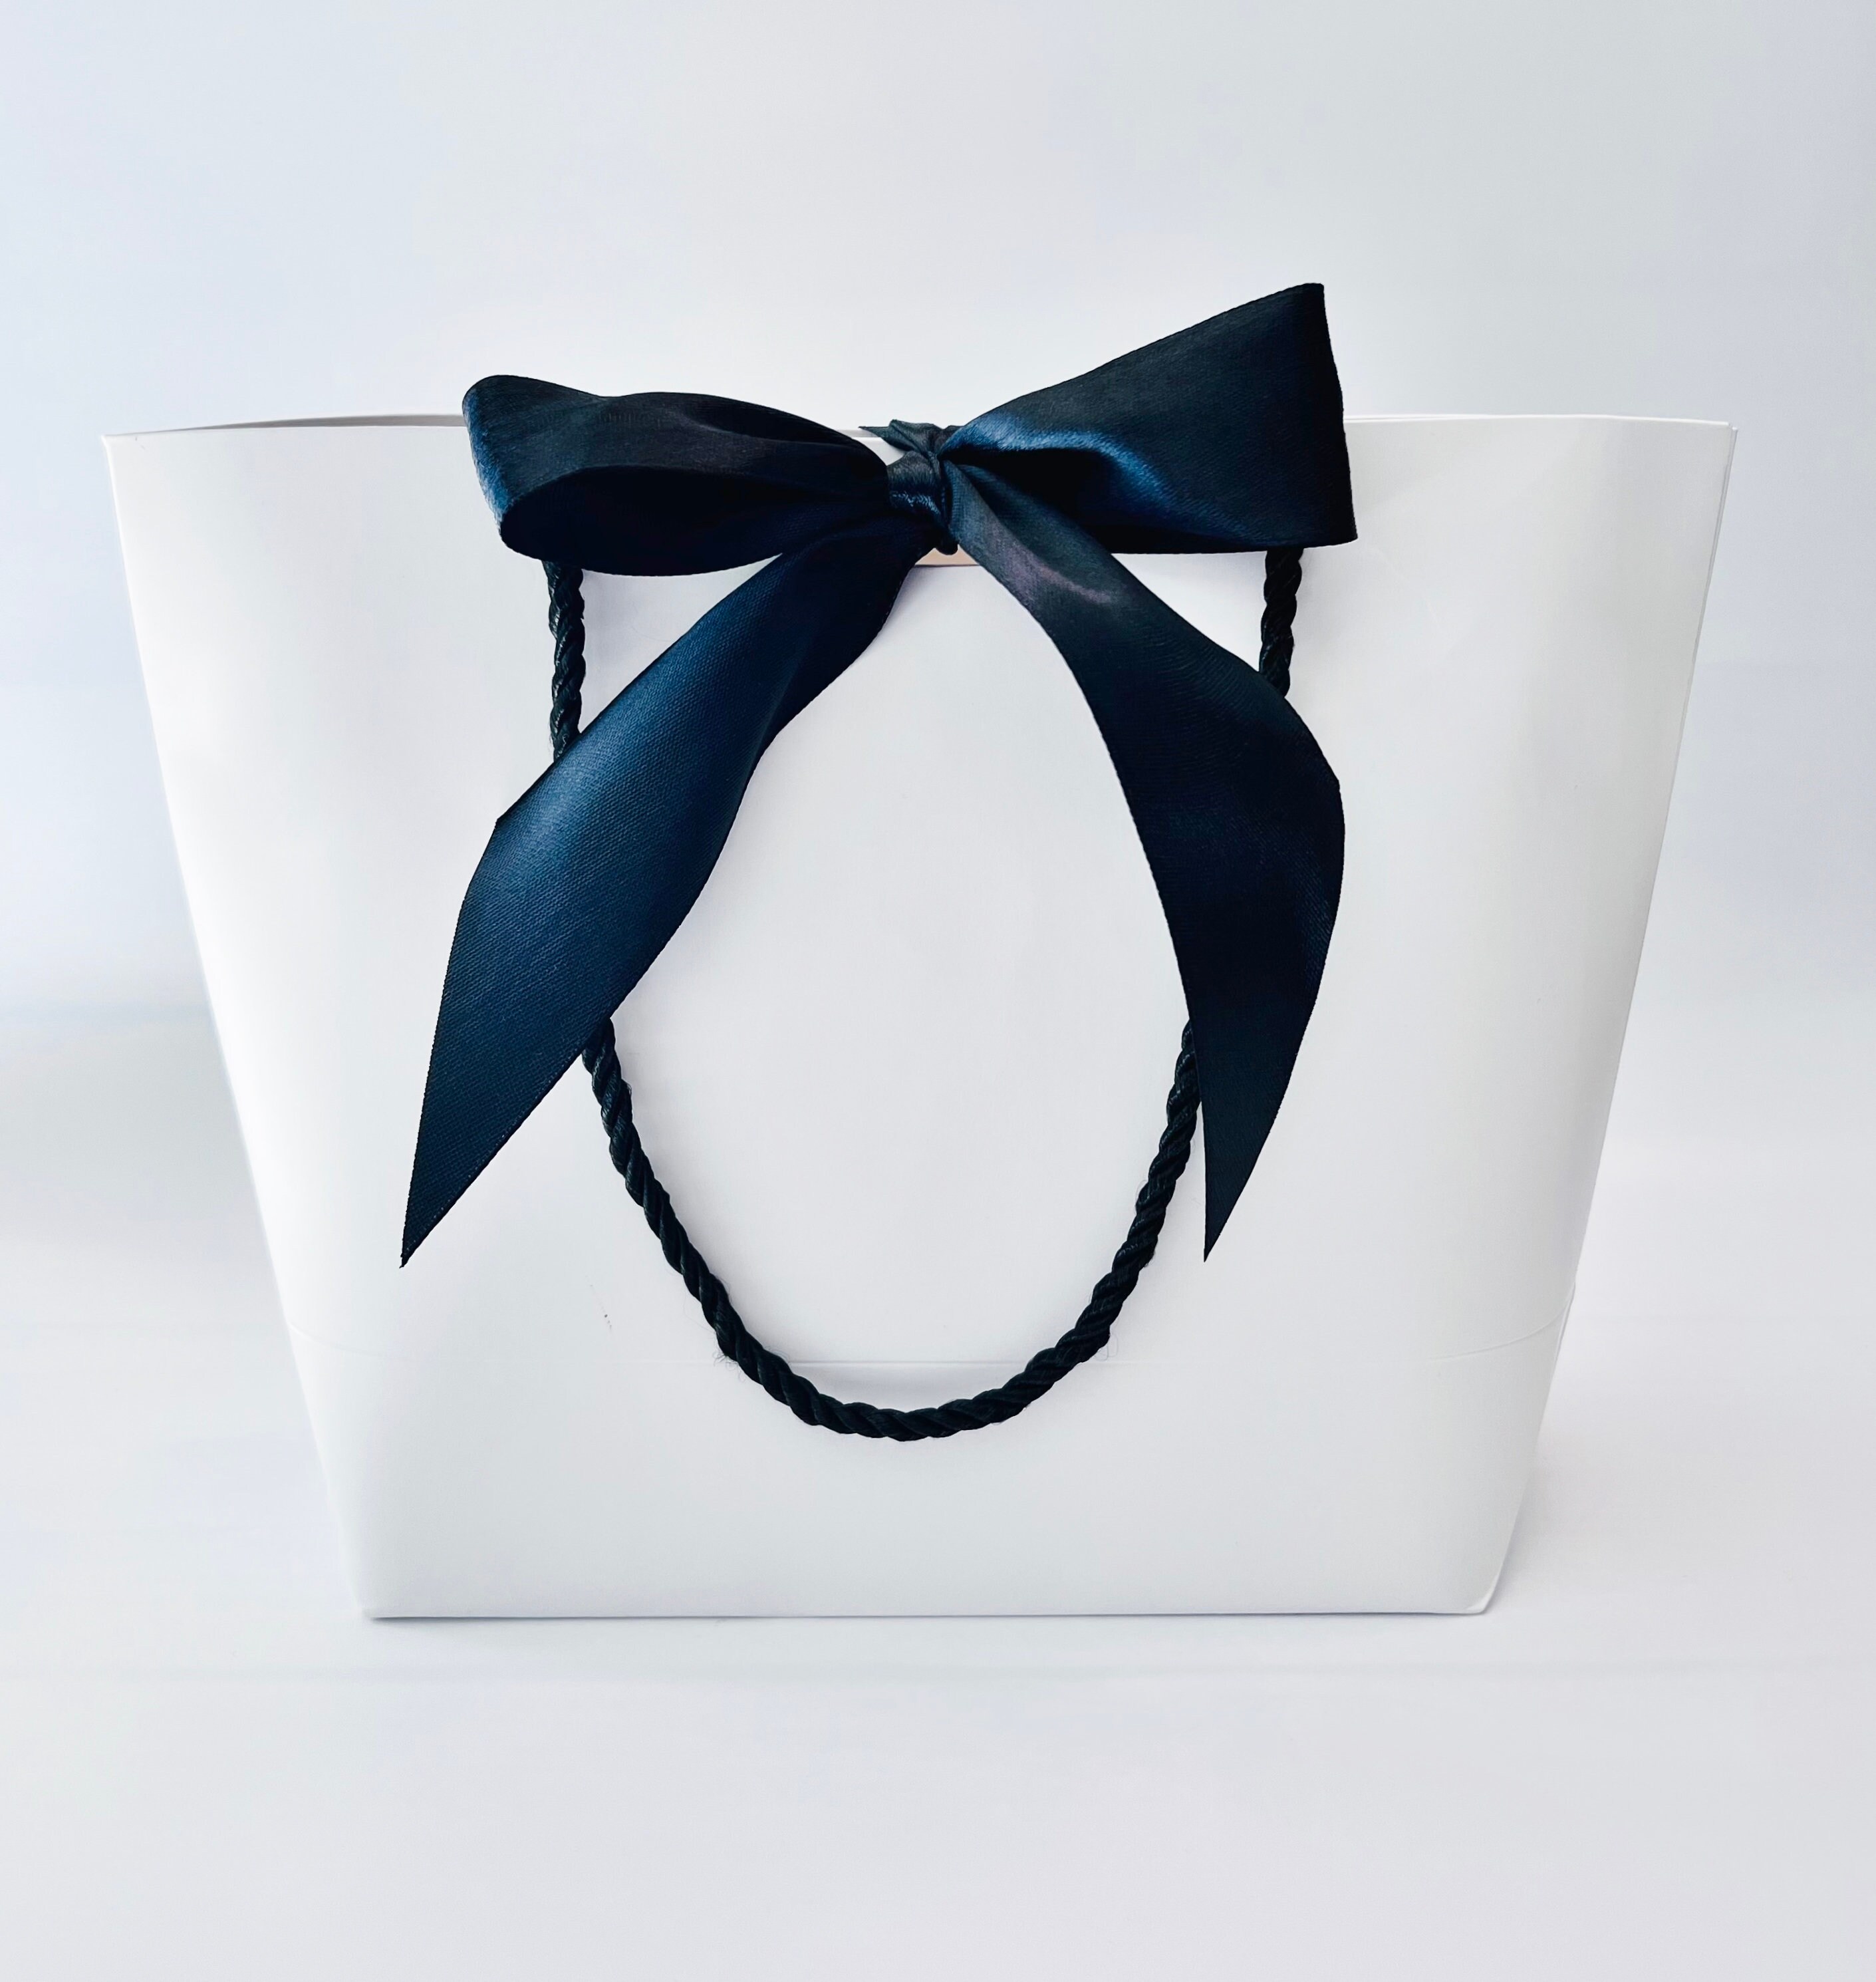 2x Kraft Paper Bags with Personalized Tags Ribbon Wedding Gift